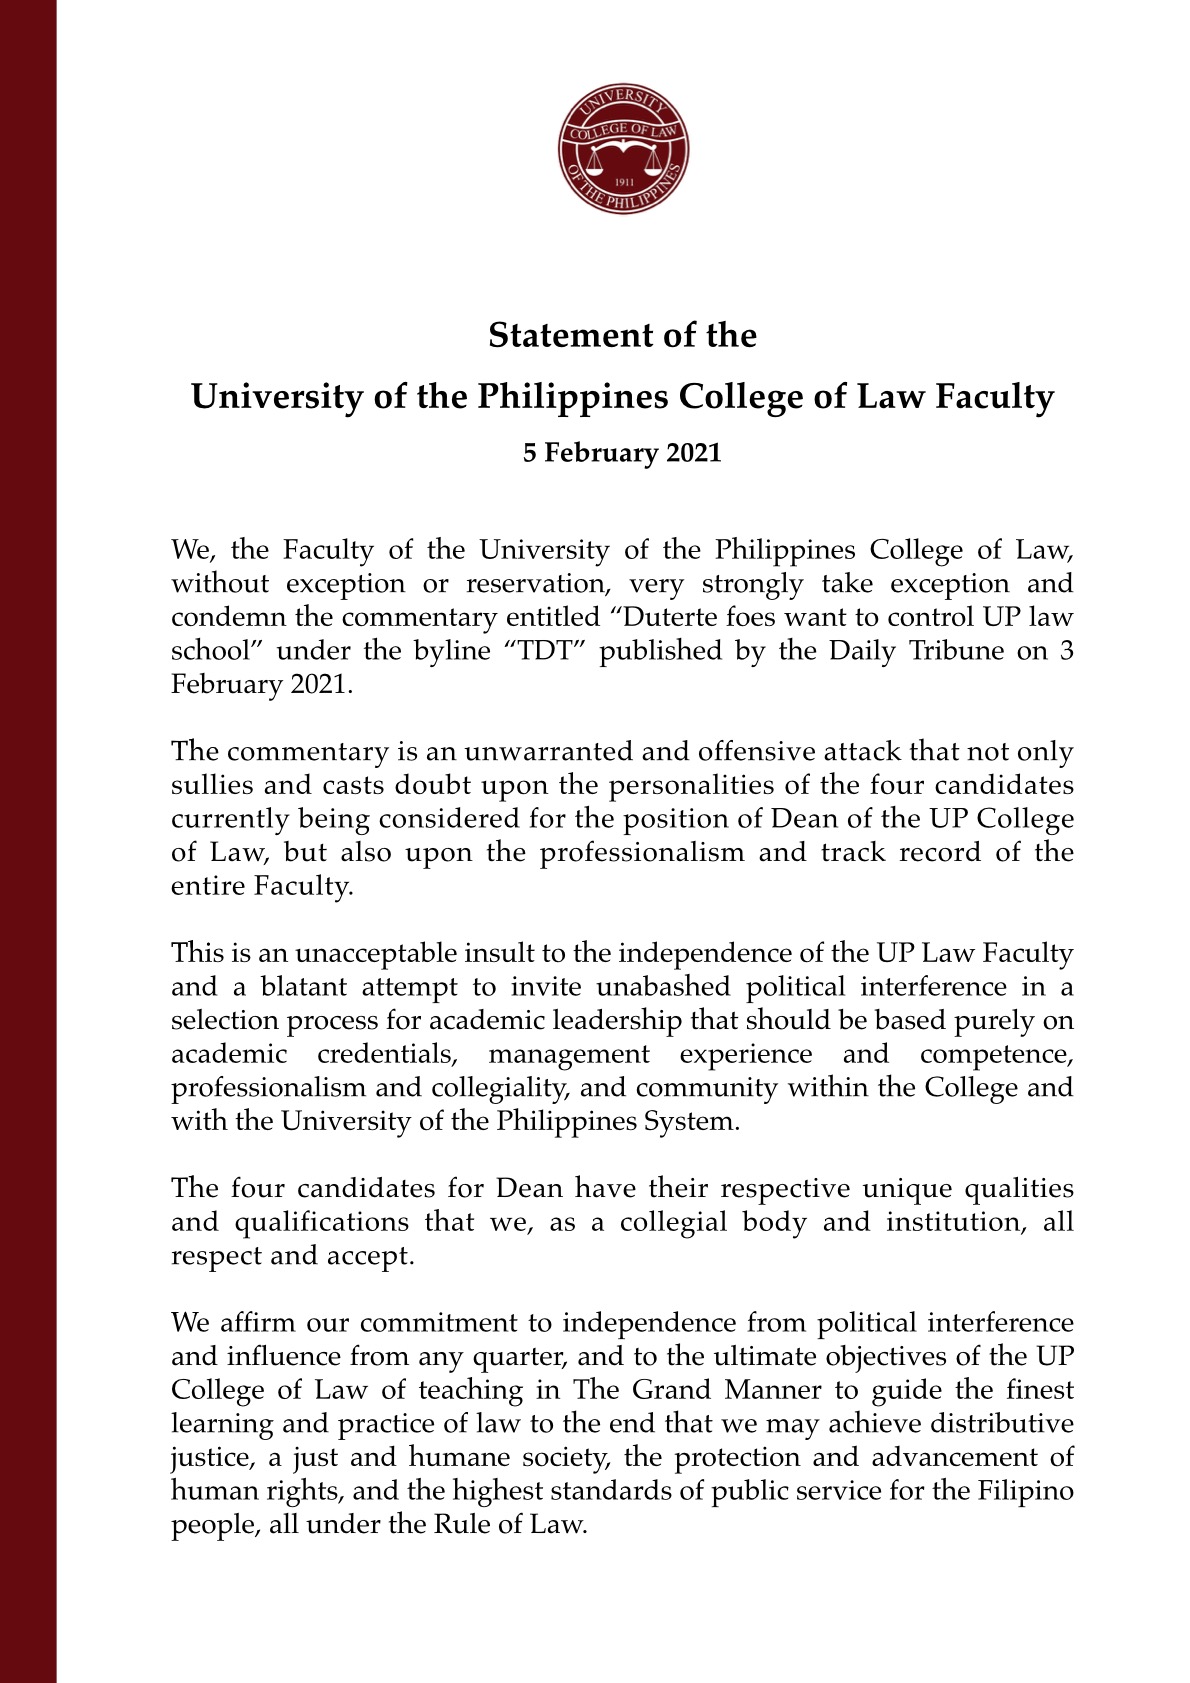 Statement of the University of the Philippines College of Law Faculty on Daily Tribune Commentary 5 February 2020